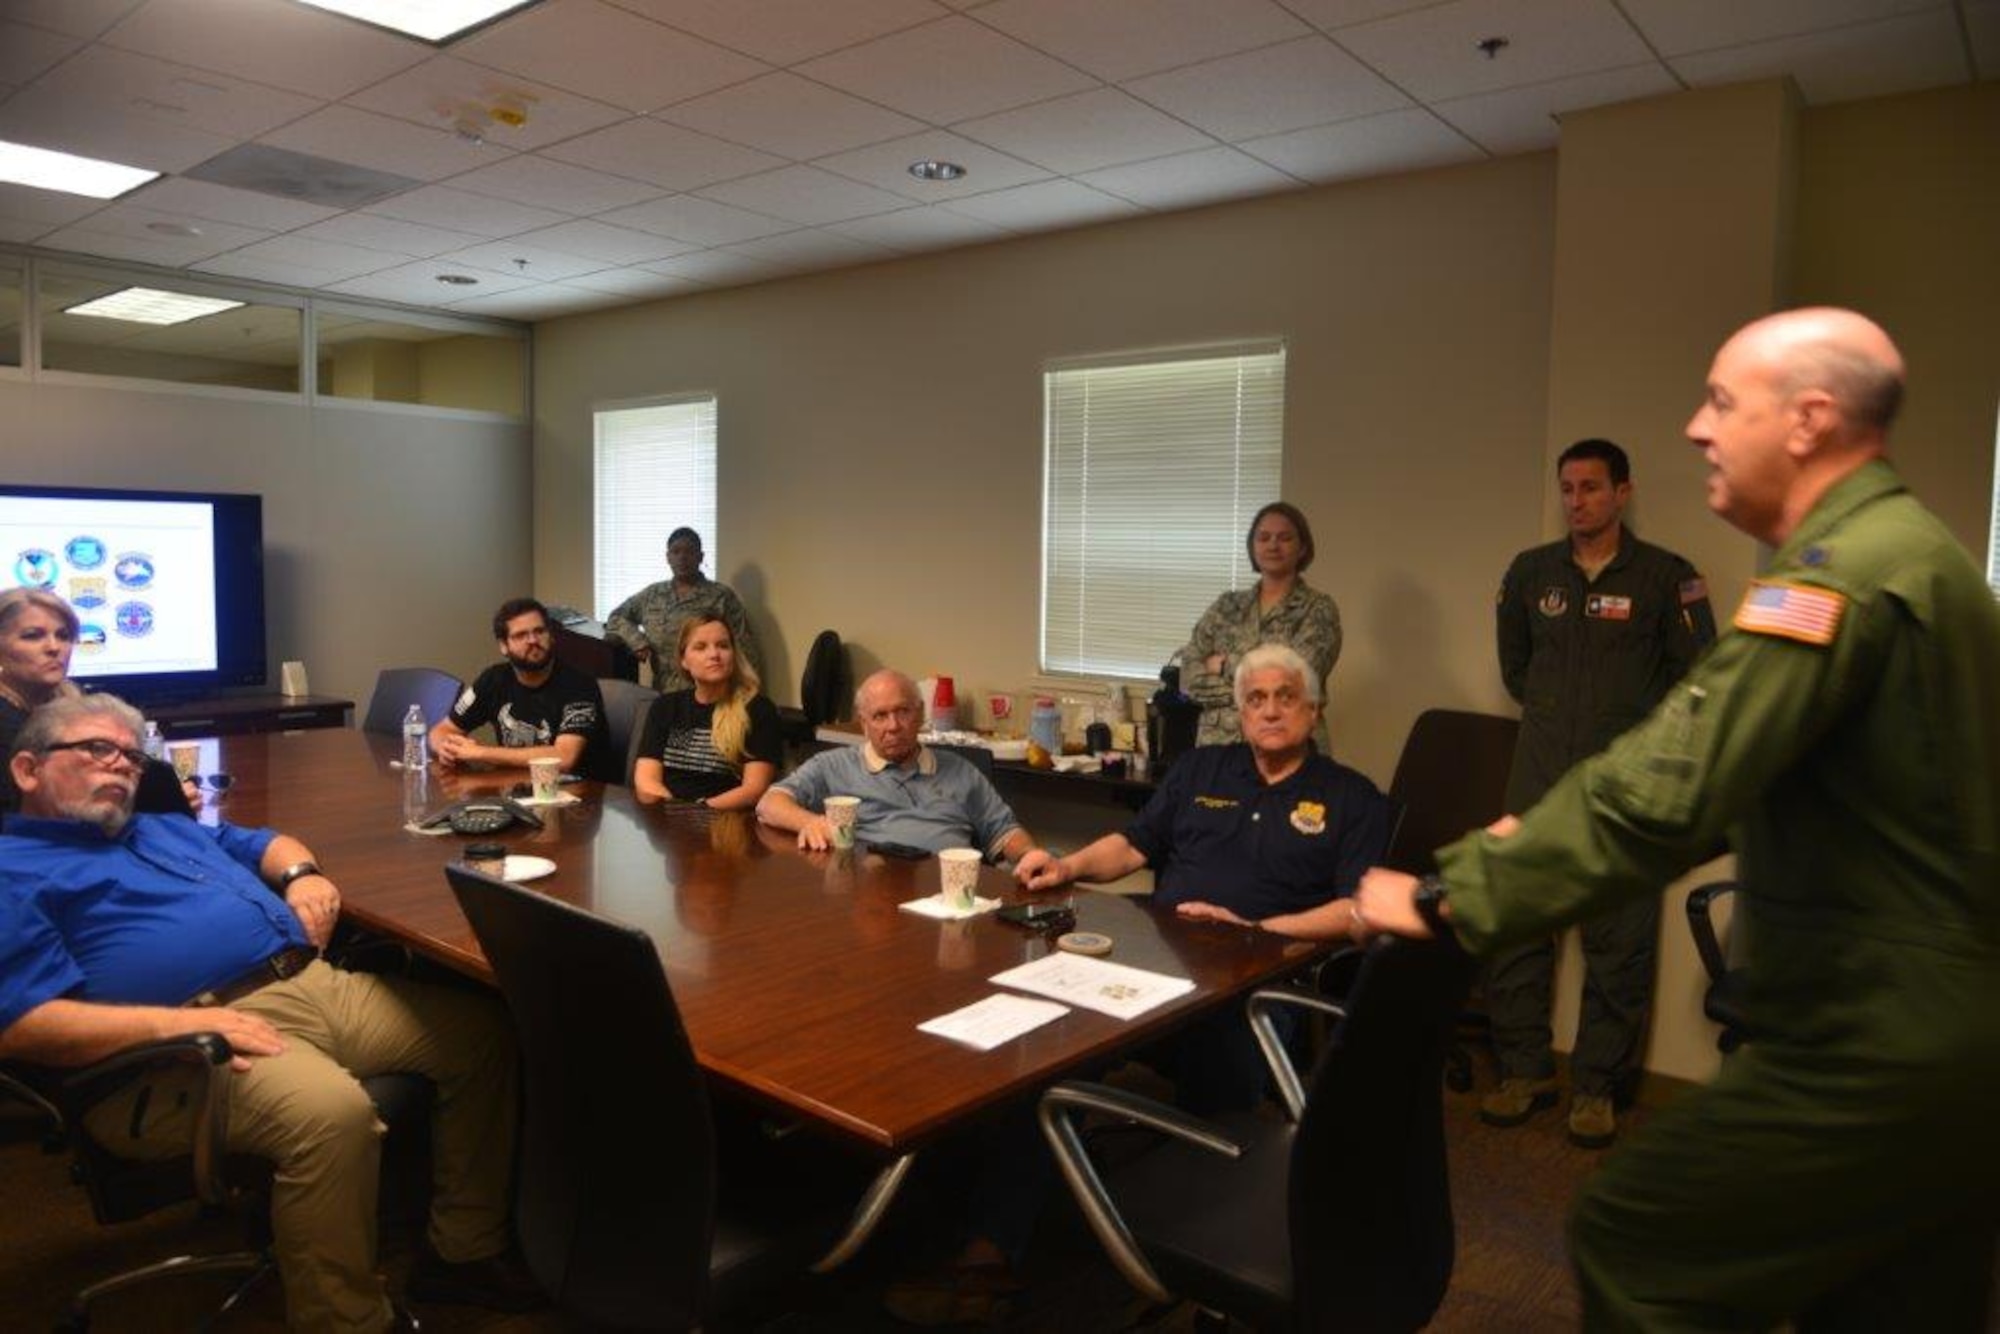 Lt. Col. James C. Miller, 433rd Operations Group Commander, JBSA-Lackland, Texas gives a mission brief to a group of Honorary Commanders and San Antonio’s civic leaders, Nov. 18, 2017, during an Operations’ Group tour before experiencing flight in a C-5M Super Galaxy Simulator. (U.S. Air Force photo by Minnie Jones)